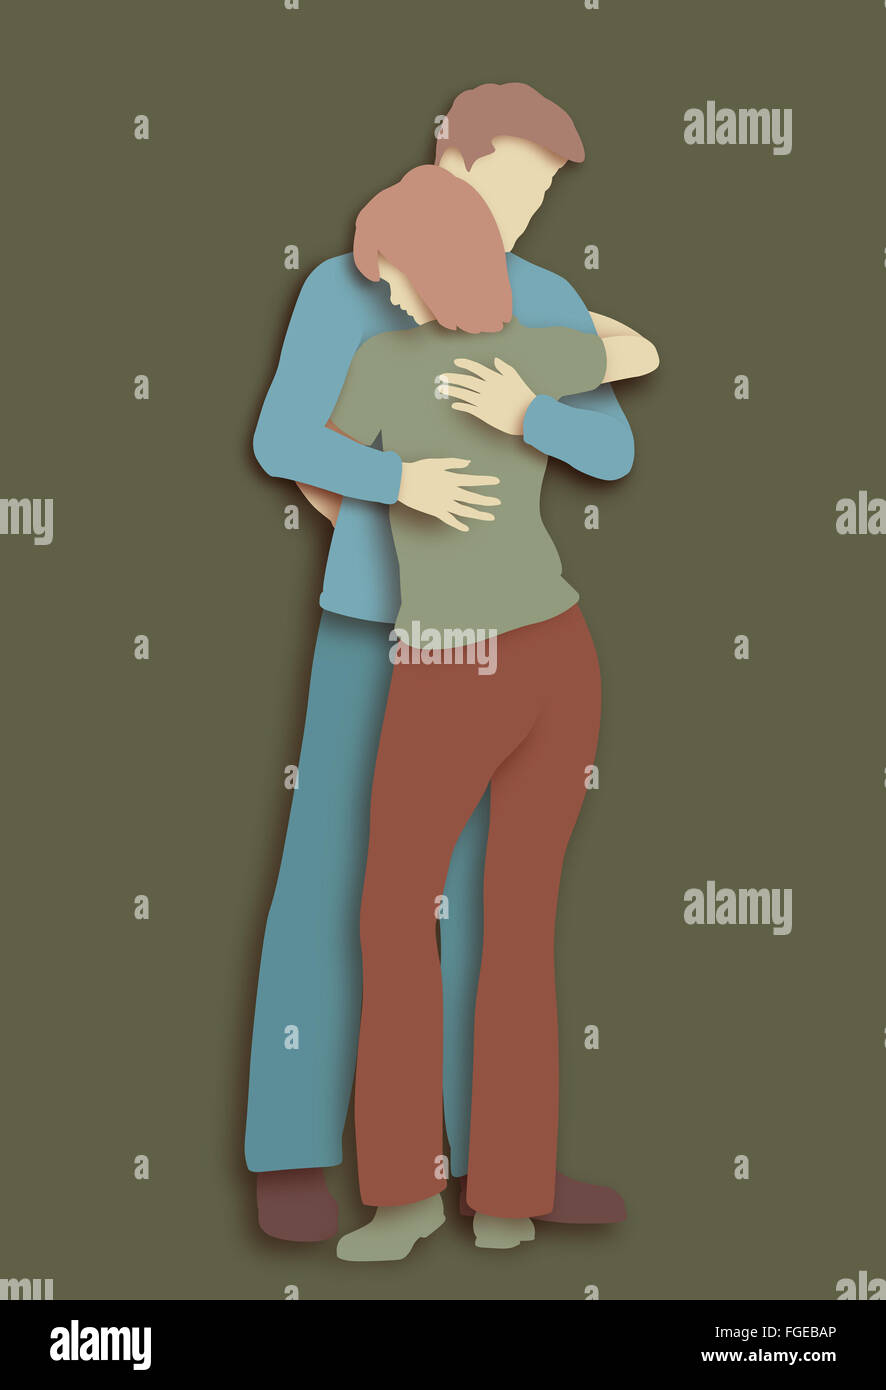 Cutout illustration of a man and woman hugging each other Stock Photo